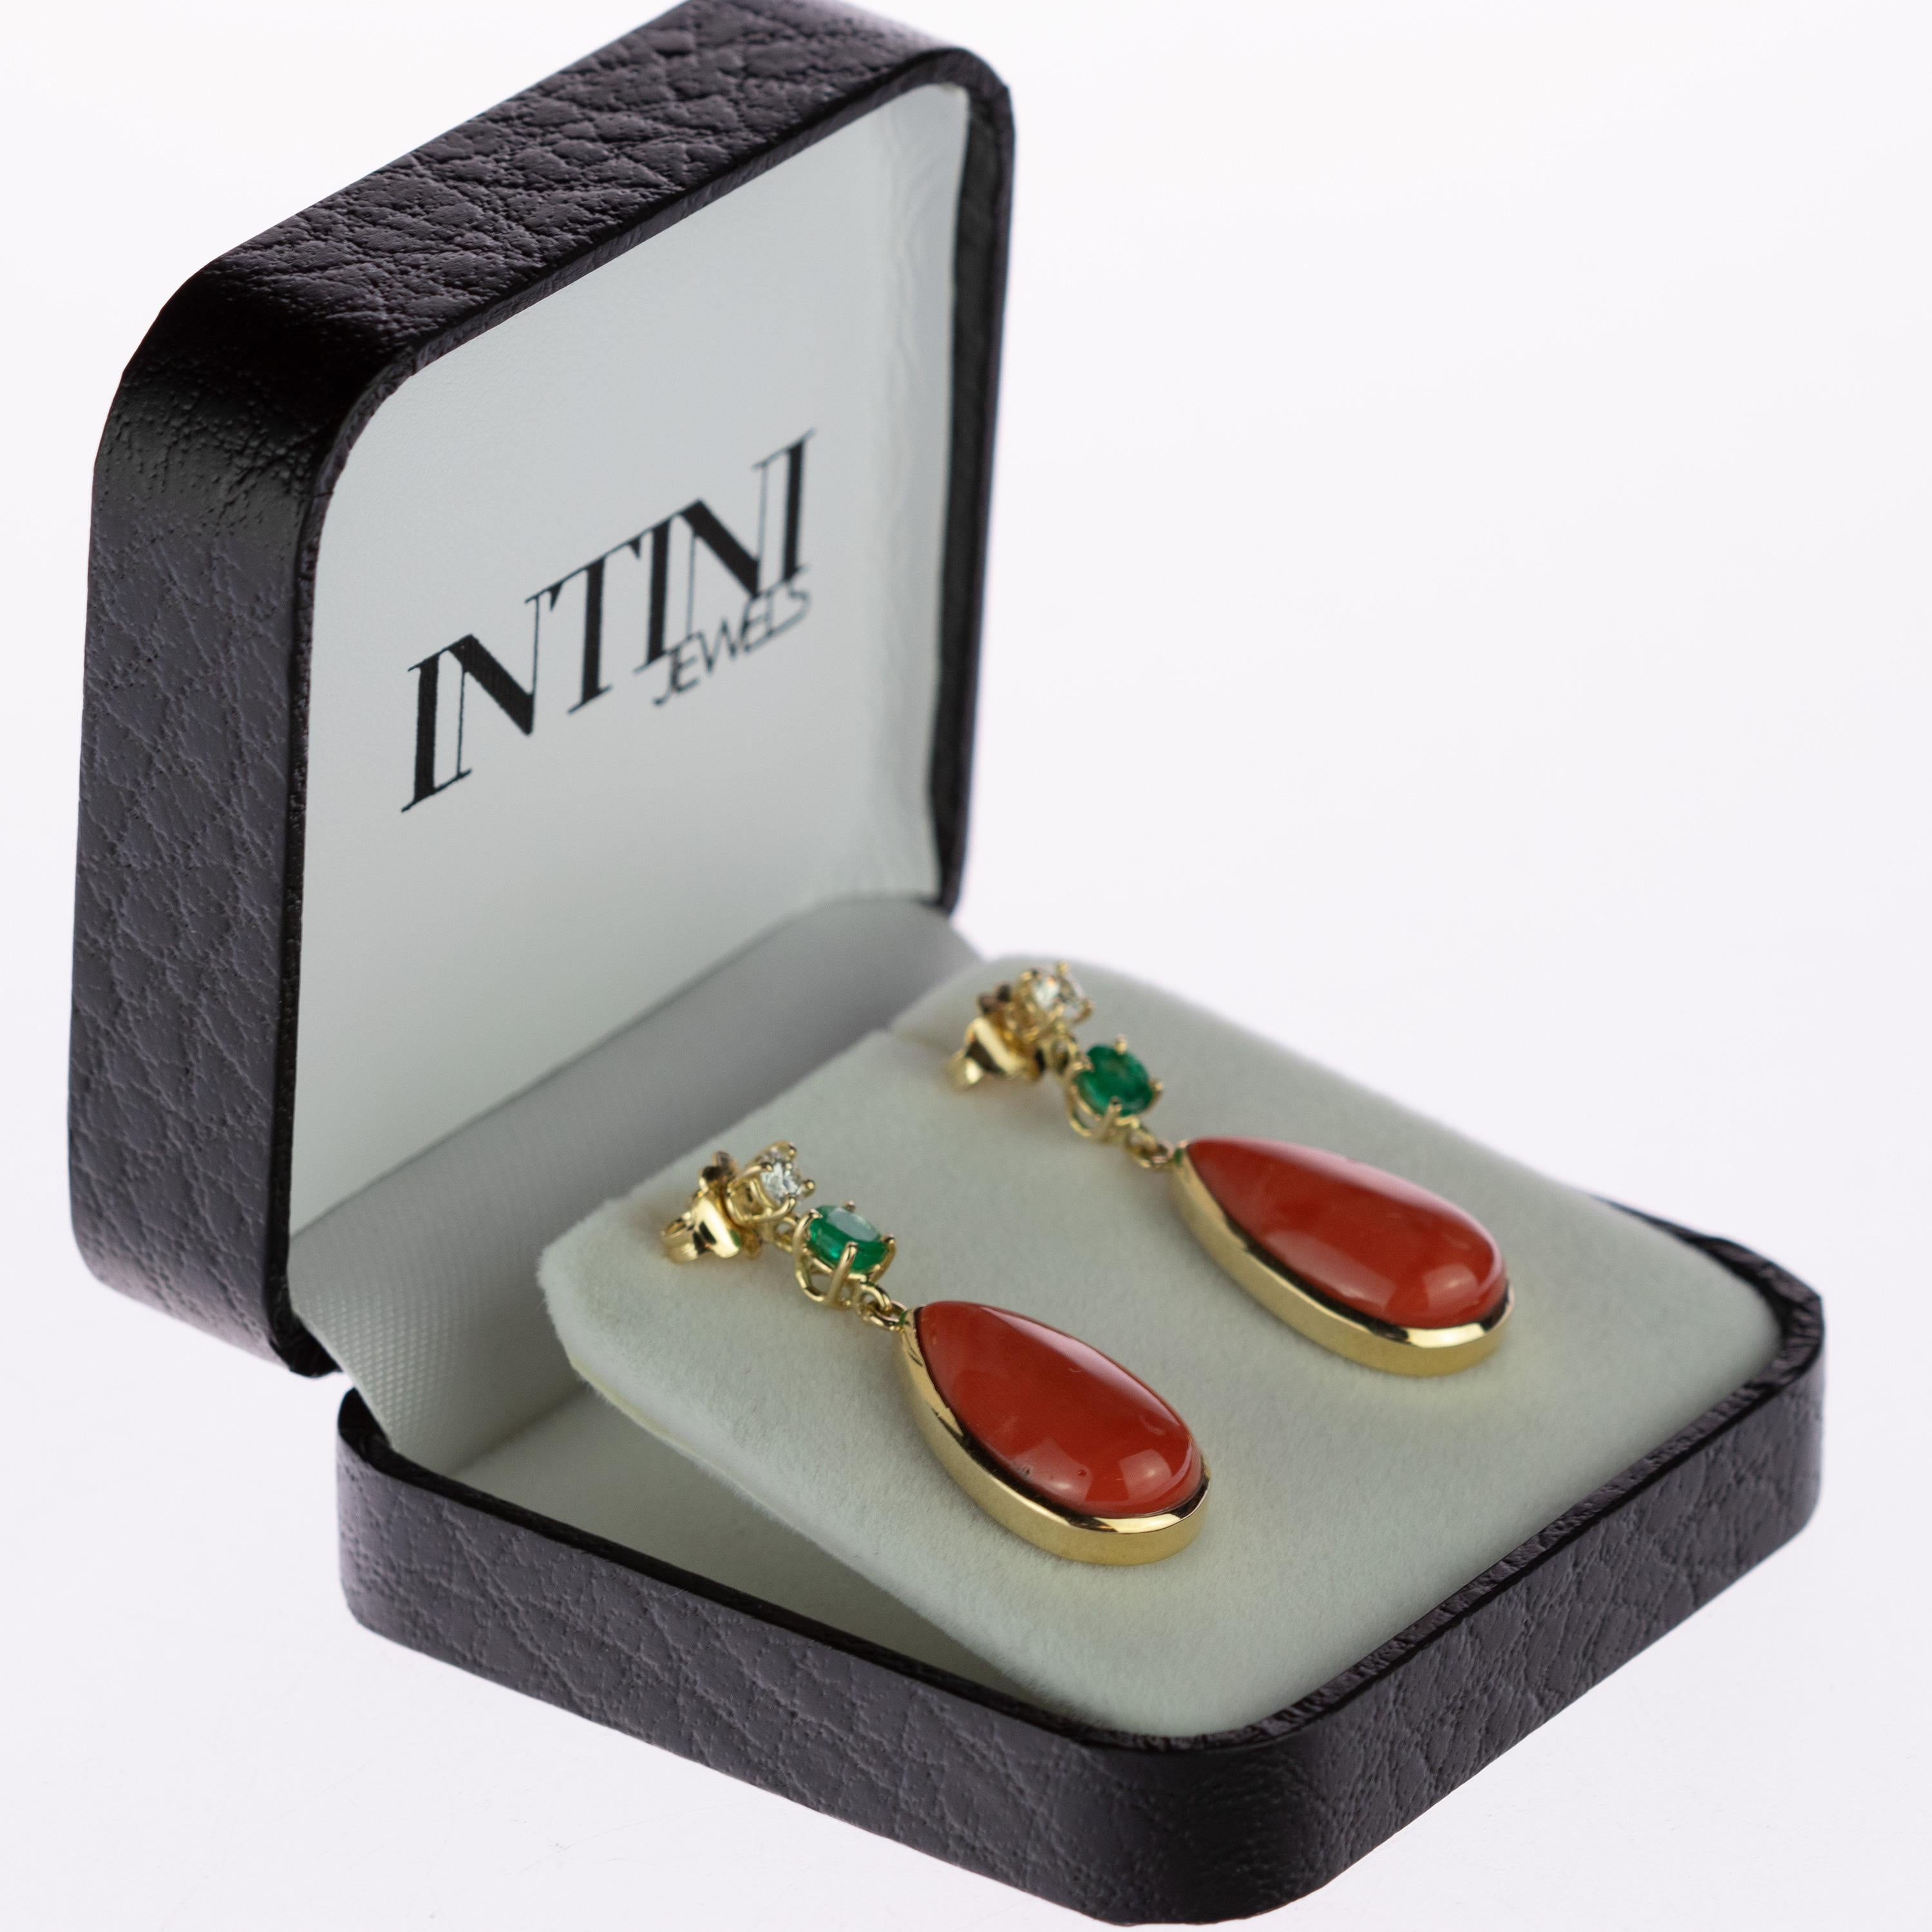 Magnificent salmon coral and emerald earrings surrounded by delicate 18 karat yellow gold details. The creation is made even more precious by two birlliant cut diamonds of the ighest quality. Evoking all the italian tradition resulting in a stunning